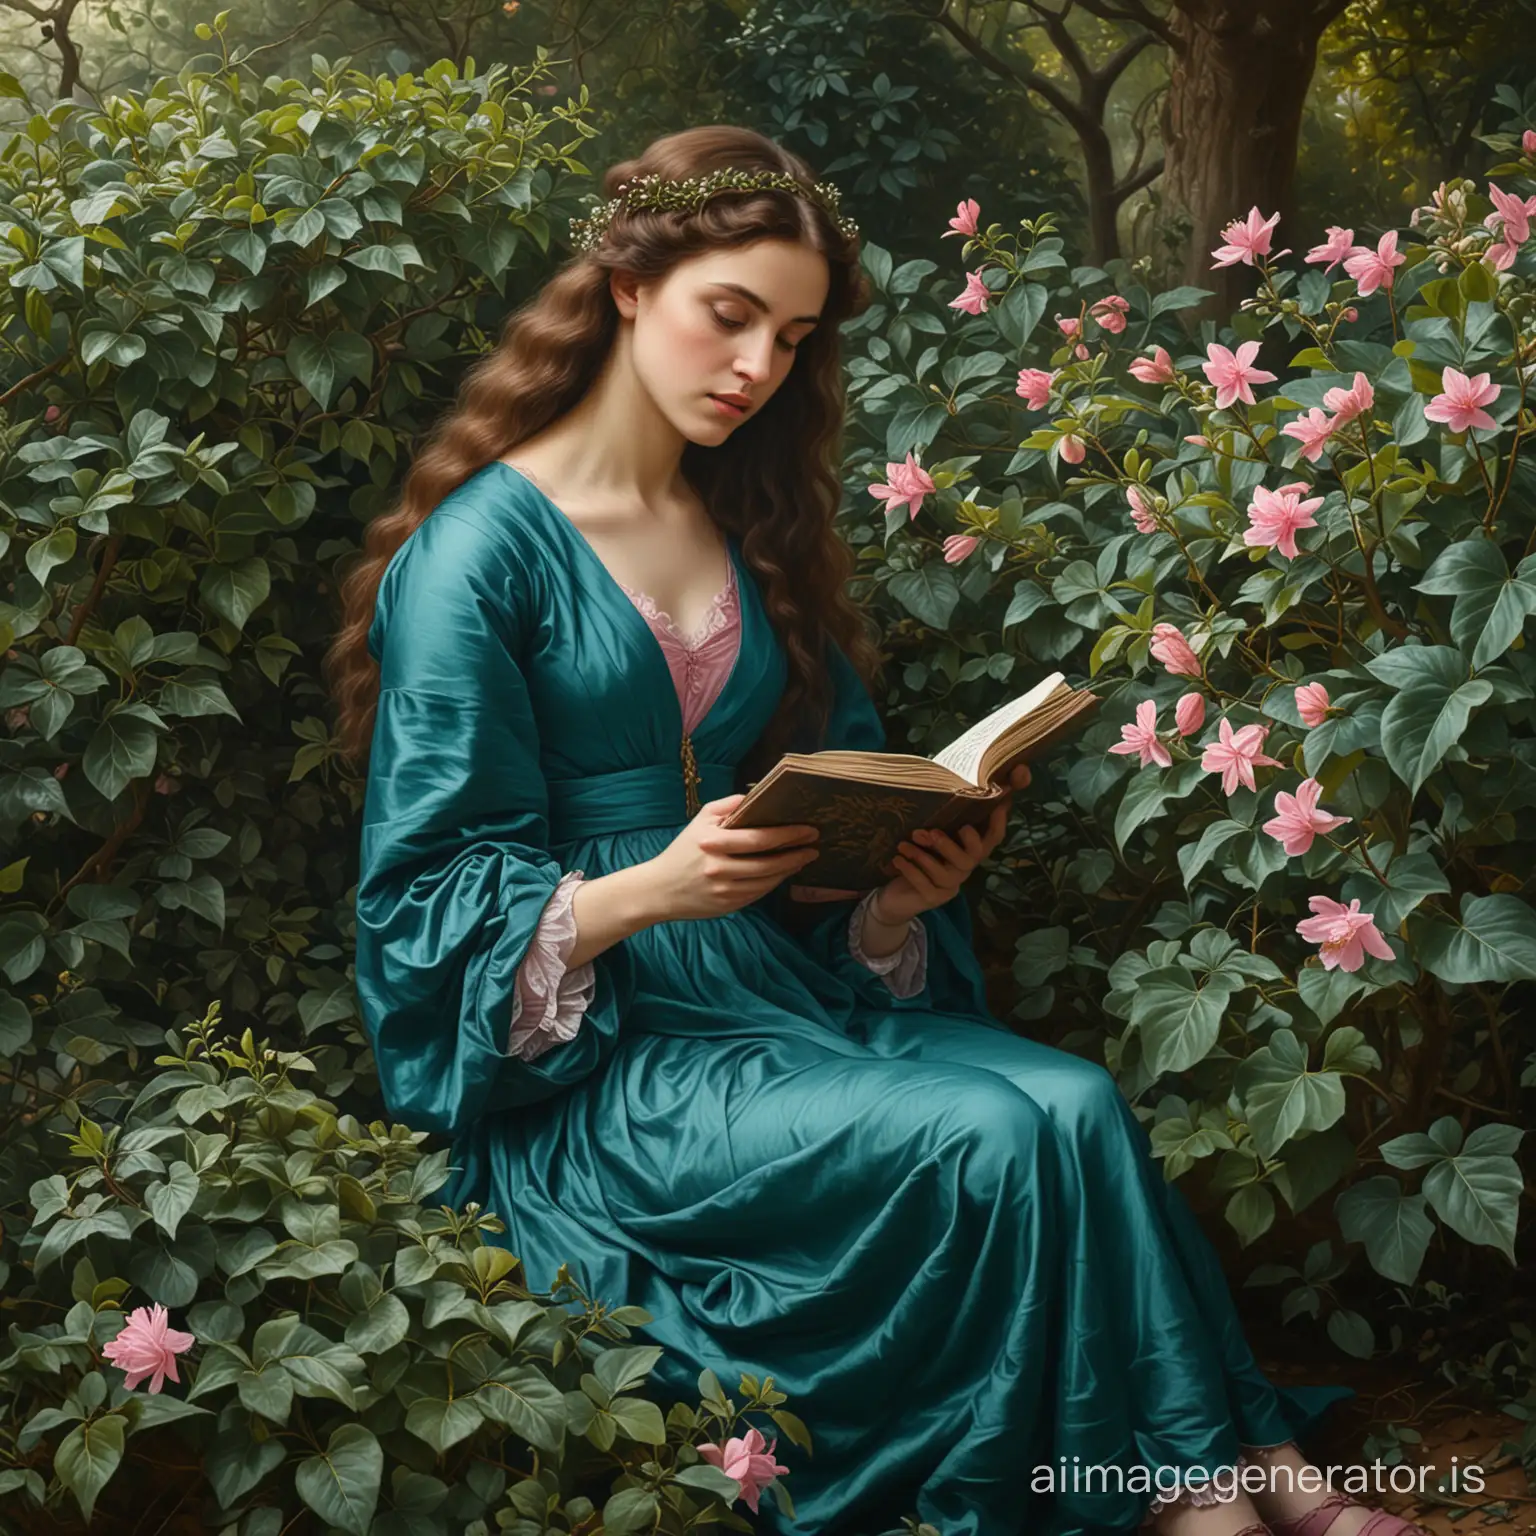 A masterpiece, Pre-Raphaelite painting, a young woman with dark hair sits in the hedera bushes, in full height, diagonal angle, dark turquoise dress, open book, a partially bloomed pink flower in hand, through the branches of plants we see an exit from the bushes, sunlight breaking through from there, botanical hyperrealism, the style of the artist Dante Gabriel Rossetti.